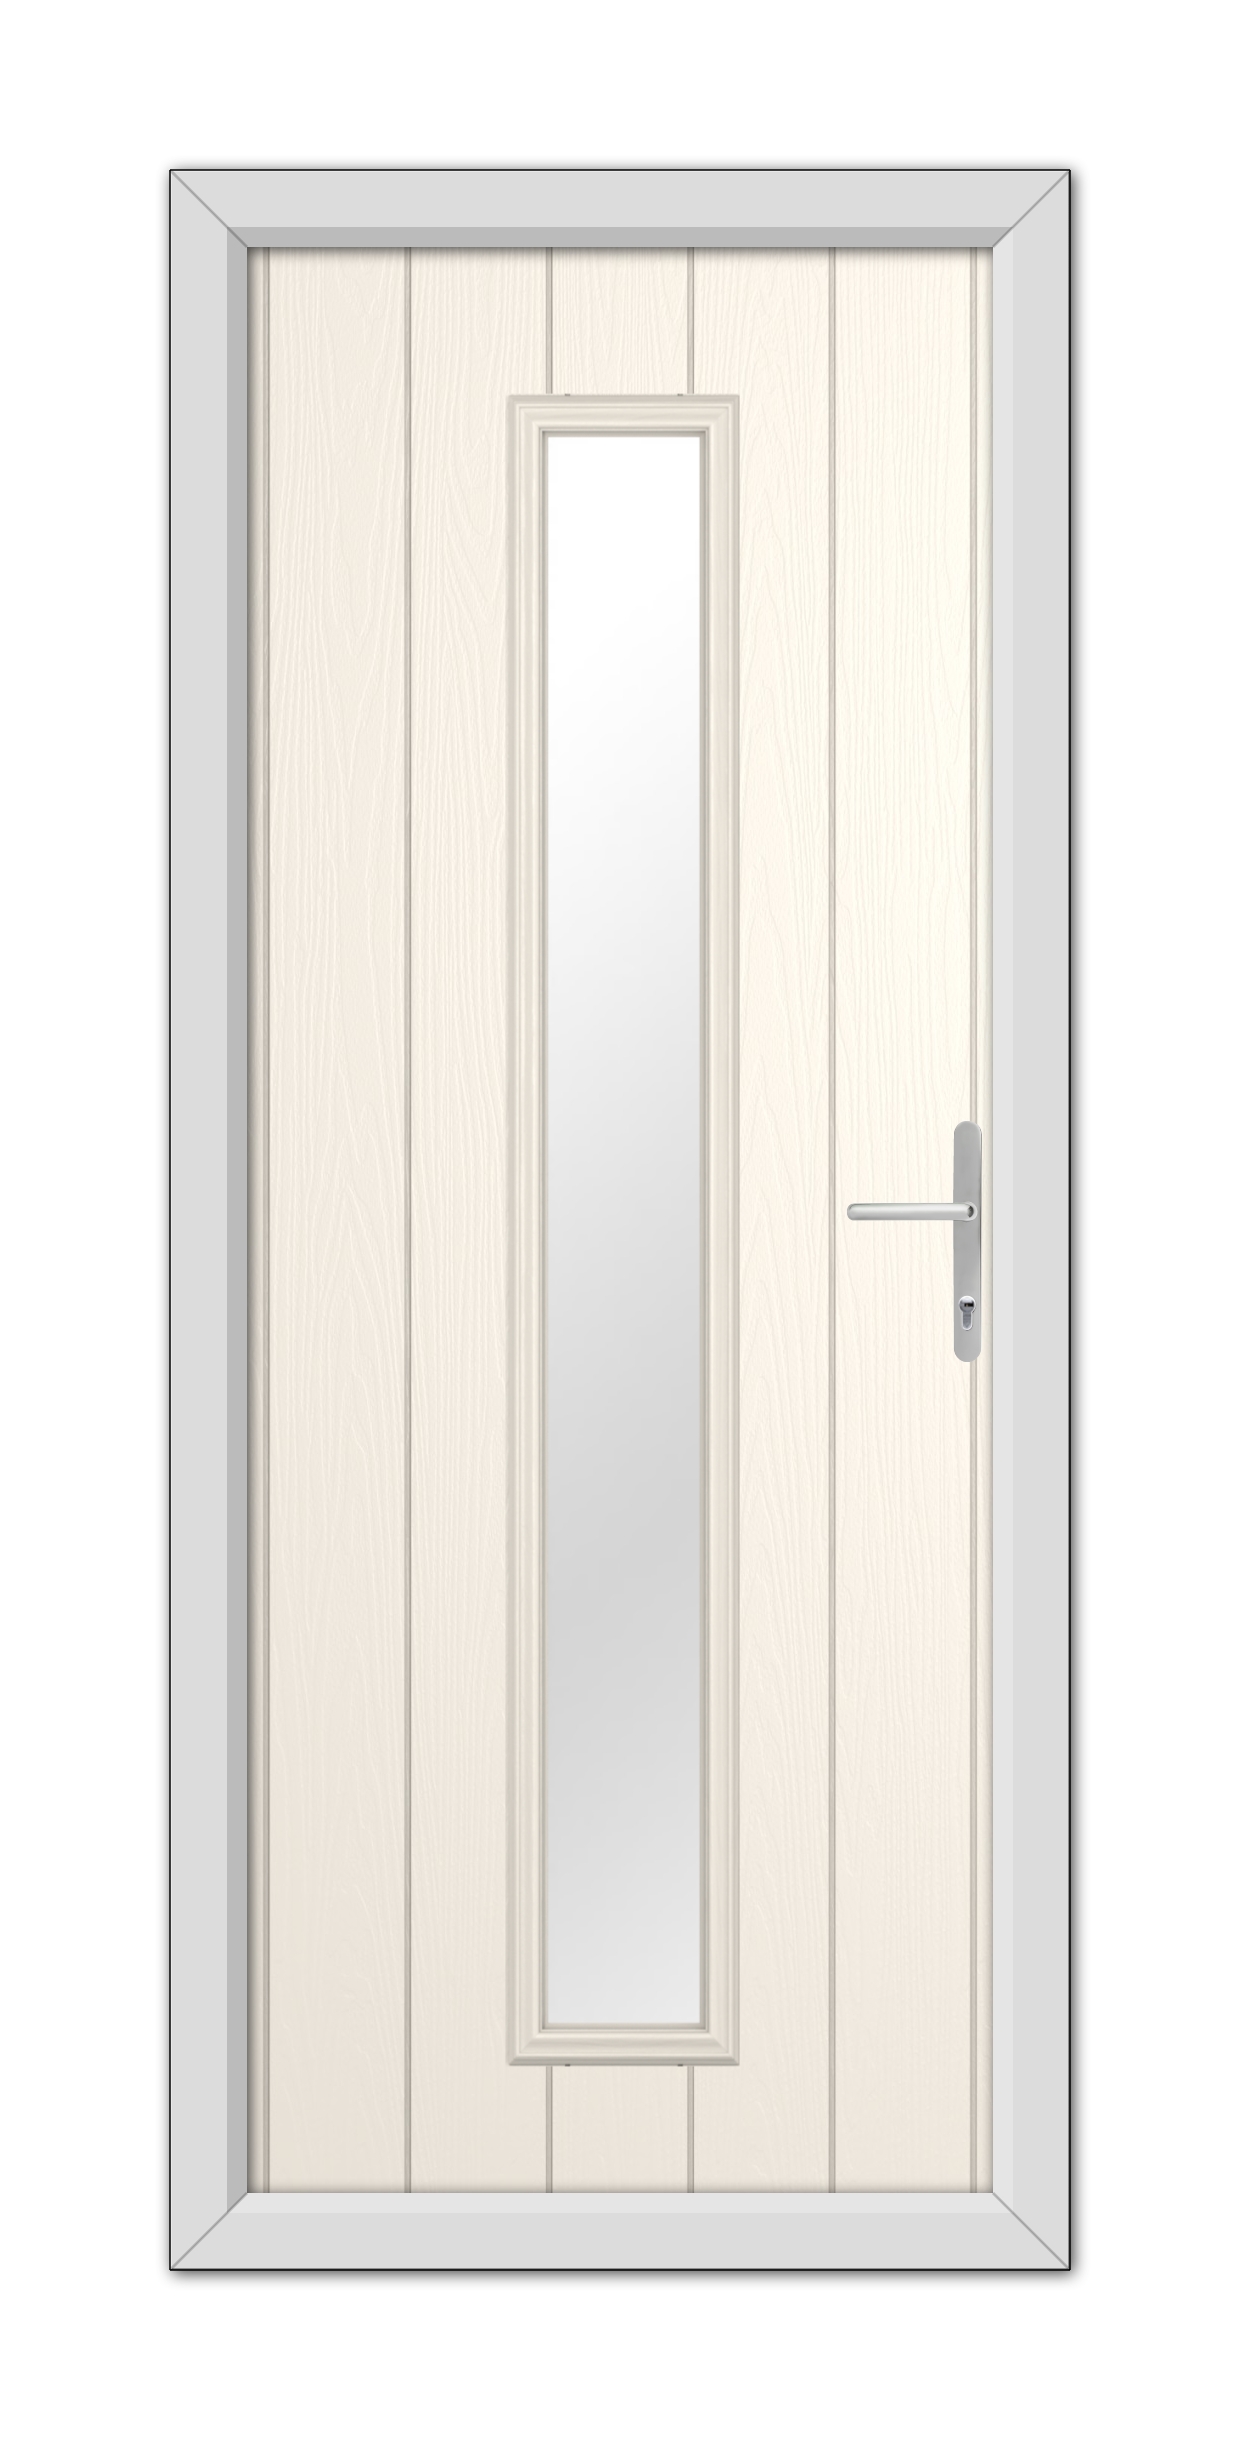 A modern White Foil Rutland Composite Door 48mm Timber Core with a vertical rectangular glass panel, set within a gray frame, equipped with a metal handle on the right side.